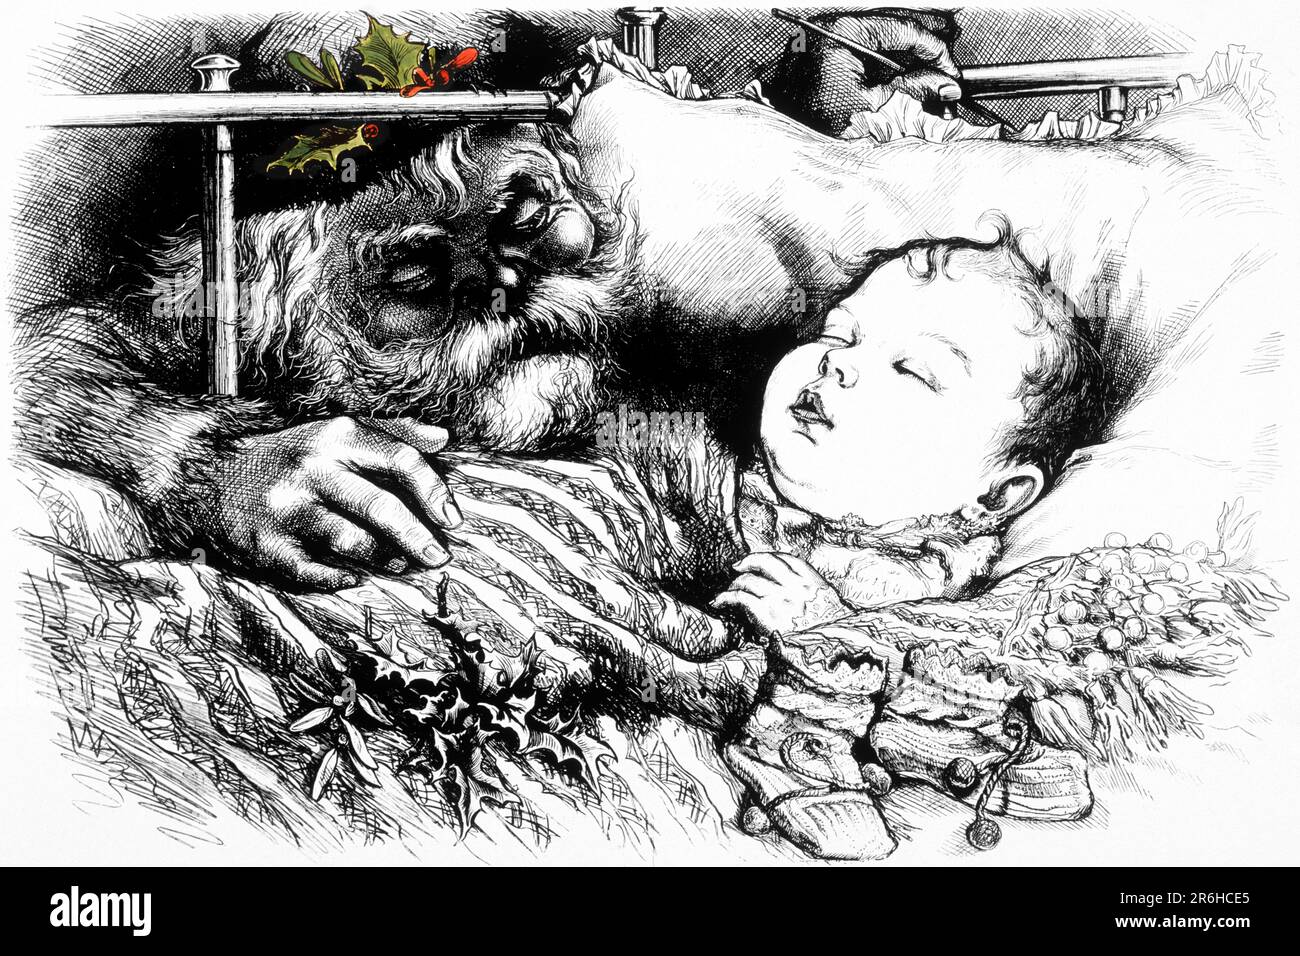 1800s 1881 SANTA PEEKING IN ON SLEEPING BABY GREEN HOLLY IN HIS CAP ILLUSTRATION THOMAS NAST DRAWING ANOTHER STOCKING TO FILL - kx13217 NAW001 HARS HOME LIFE COPY SPACE PERSONS CARING MALES SAINT 1800s HEAD AND SHOULDERS HIS MERRY DREAMING EXCITEMENT SANTA CLAUS HOLLY DECEMBER FILL DECEMBER 25 KRIS KRINGLE ST. NICK BABY BOY ELDERLY MAN ANOTHER FATHER CHRISTMAS GROWTH JOLLY JOYOUS JUVENILES NICHOLAS 1881 CAUCASIAN ETHNICITY NAST OLD FASHIONED Stock Photo